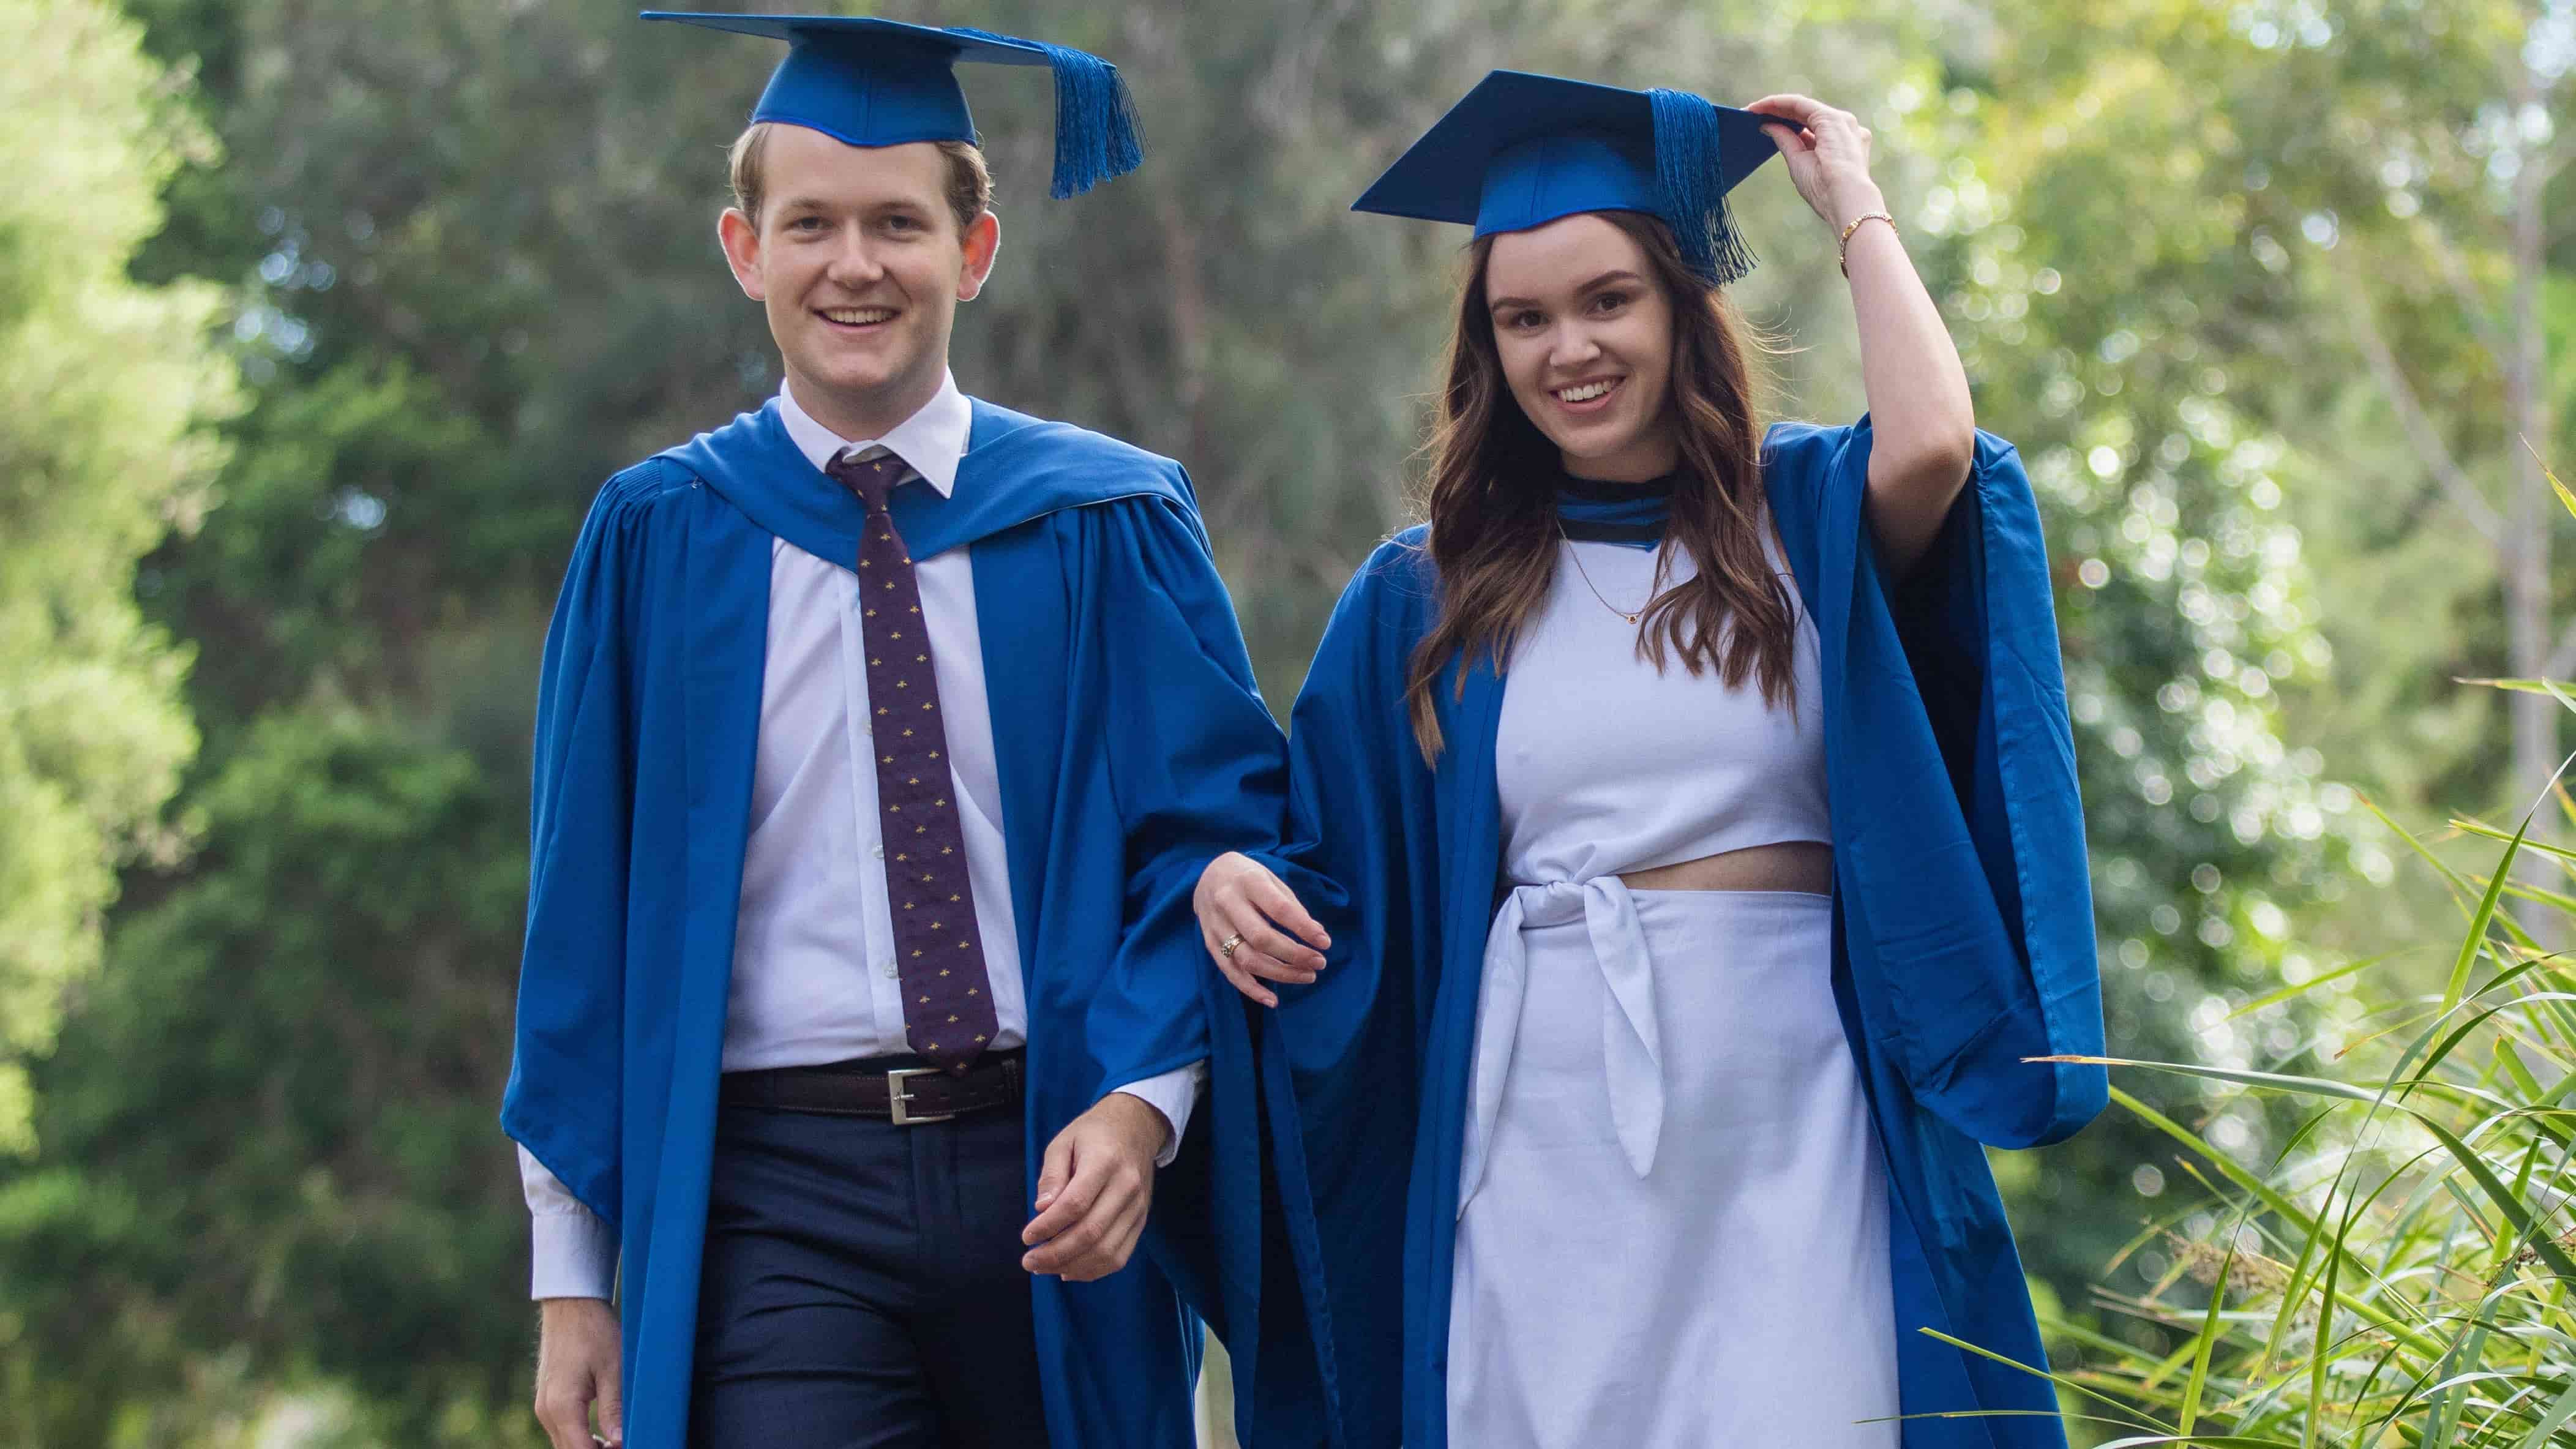 Ruby Evans and Bodhi Morgan both wear blue gowns and mortar boards. They are walking and smiling with linked arms. Photo: Andy Zakeli